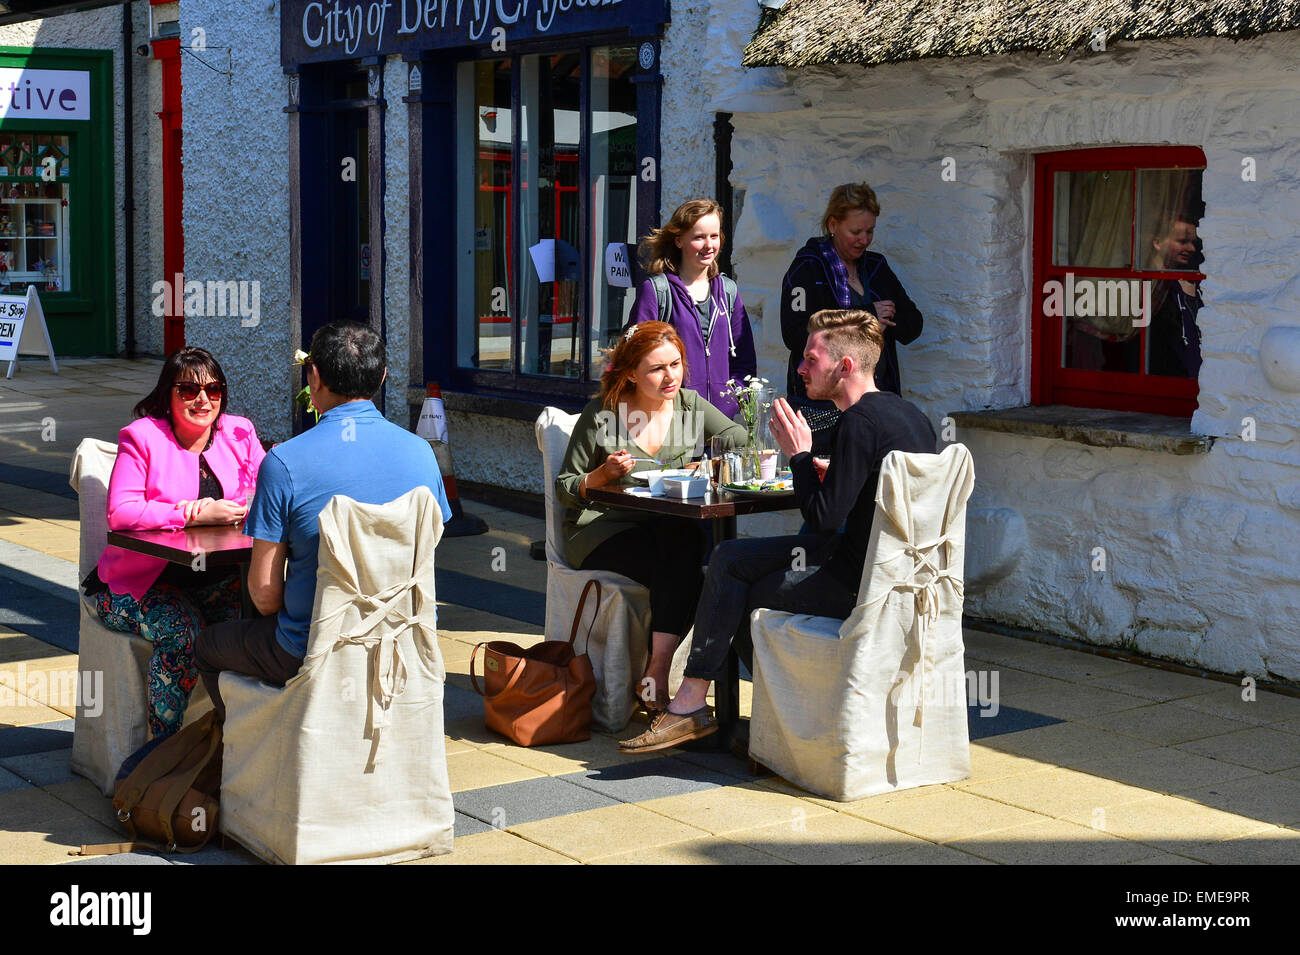 People eating alfresco in the Craft Village, Londonderry (Derry), Northern Ireland Stock Photo